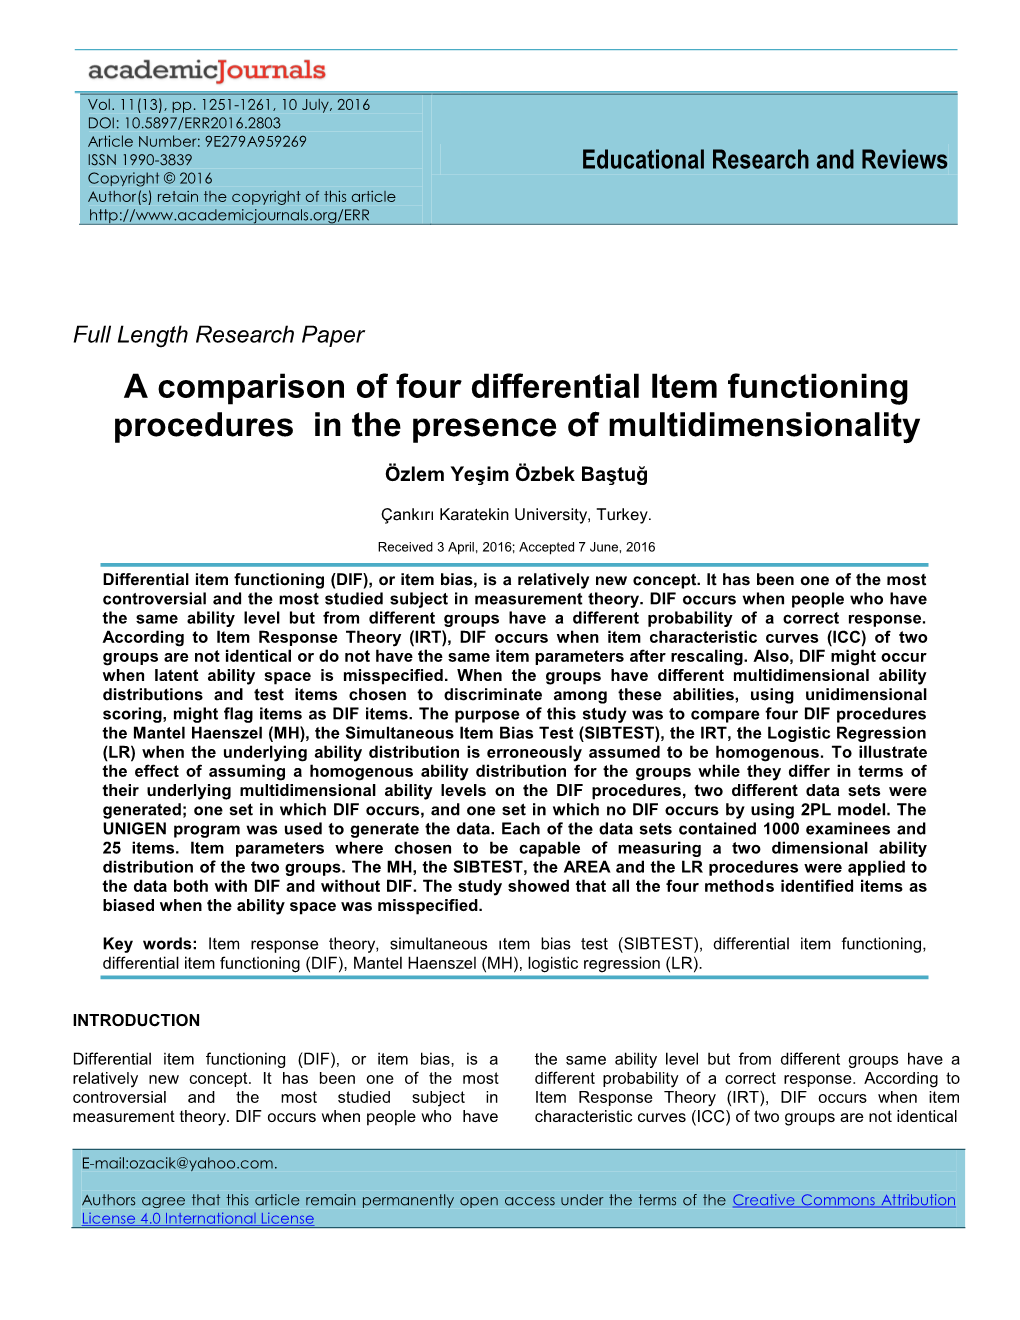 A Comparison of Four Differential Item Functioning Procedures in the Presence of Multidimensionality